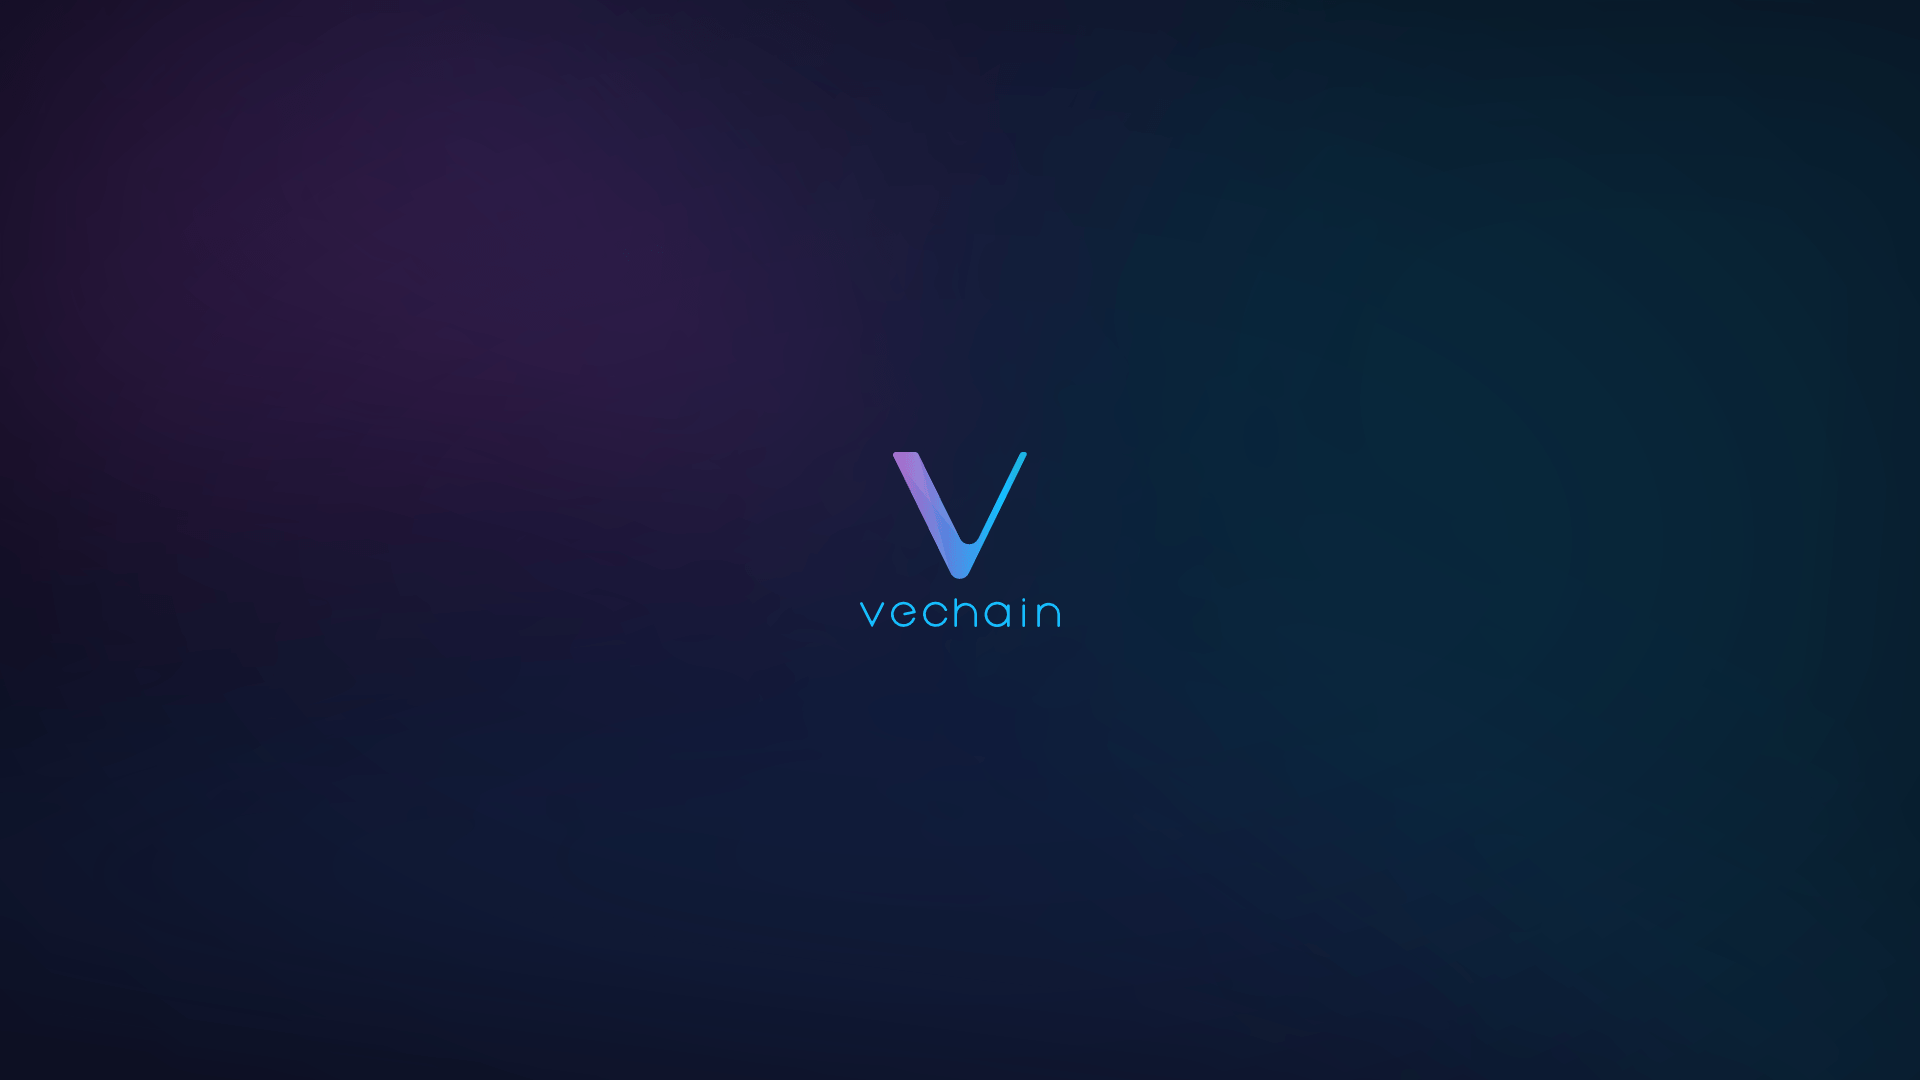 Vechain Logo - Made a simple Vechain wallpaper because I desperately needed one ...